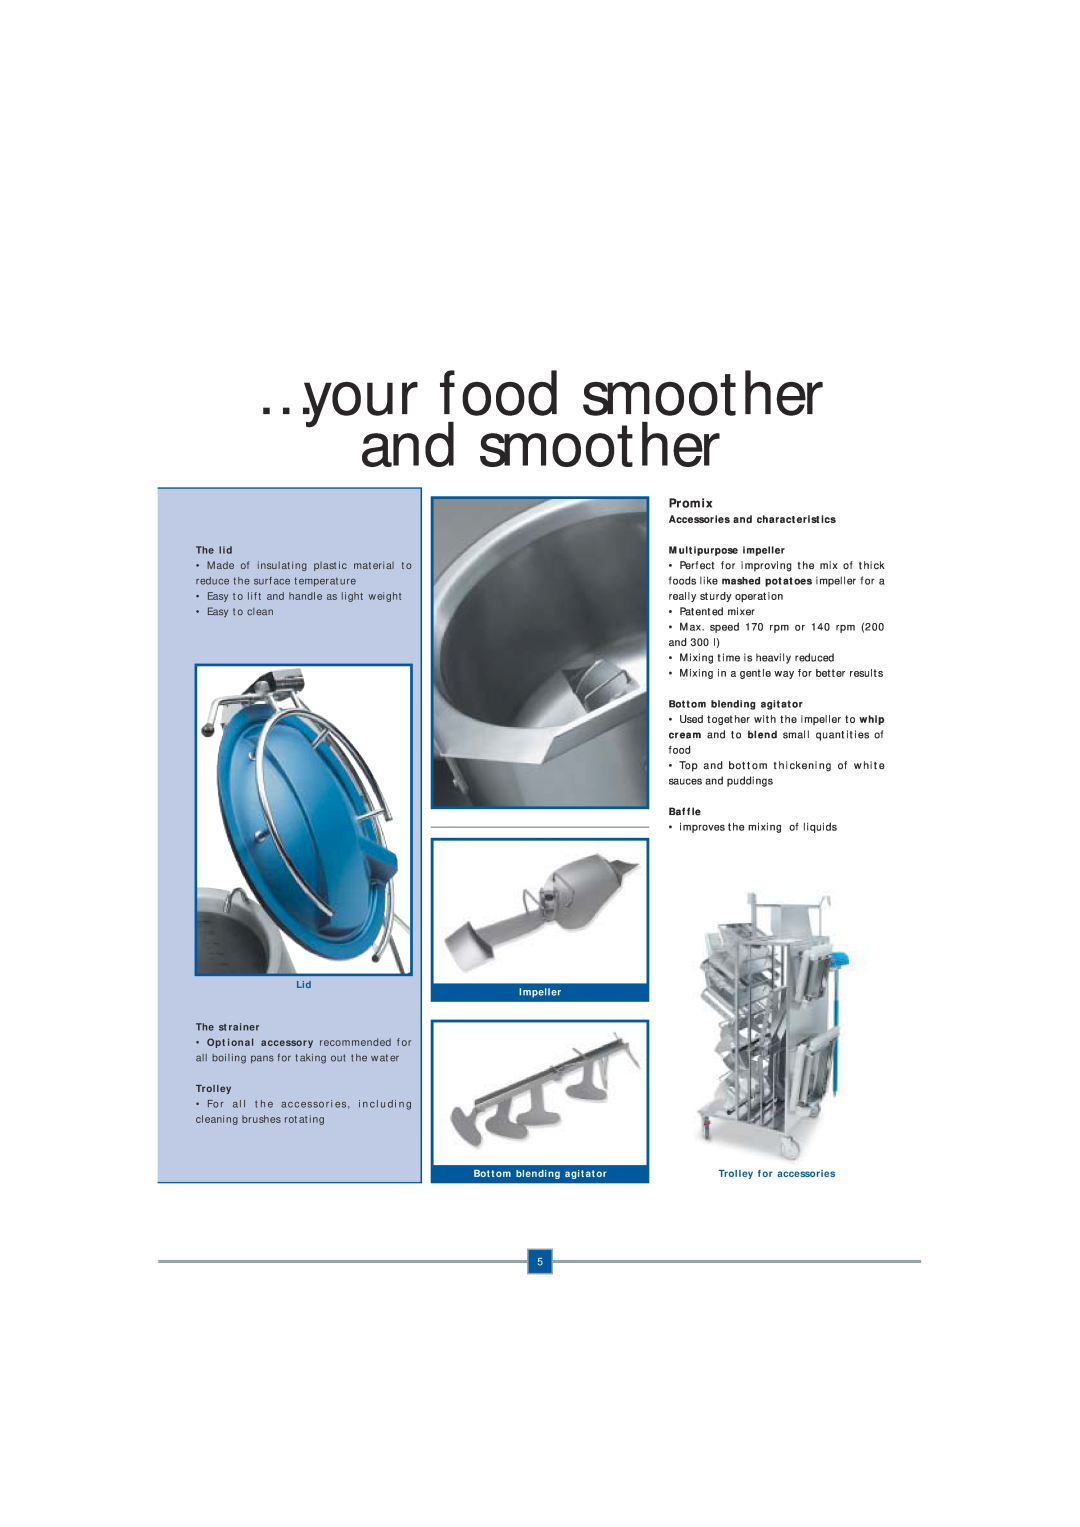 Electrolux Fryer manual …your food smoother and smoother, Promix, The lid, The strainer, Trolley, Impeller, Baffle 